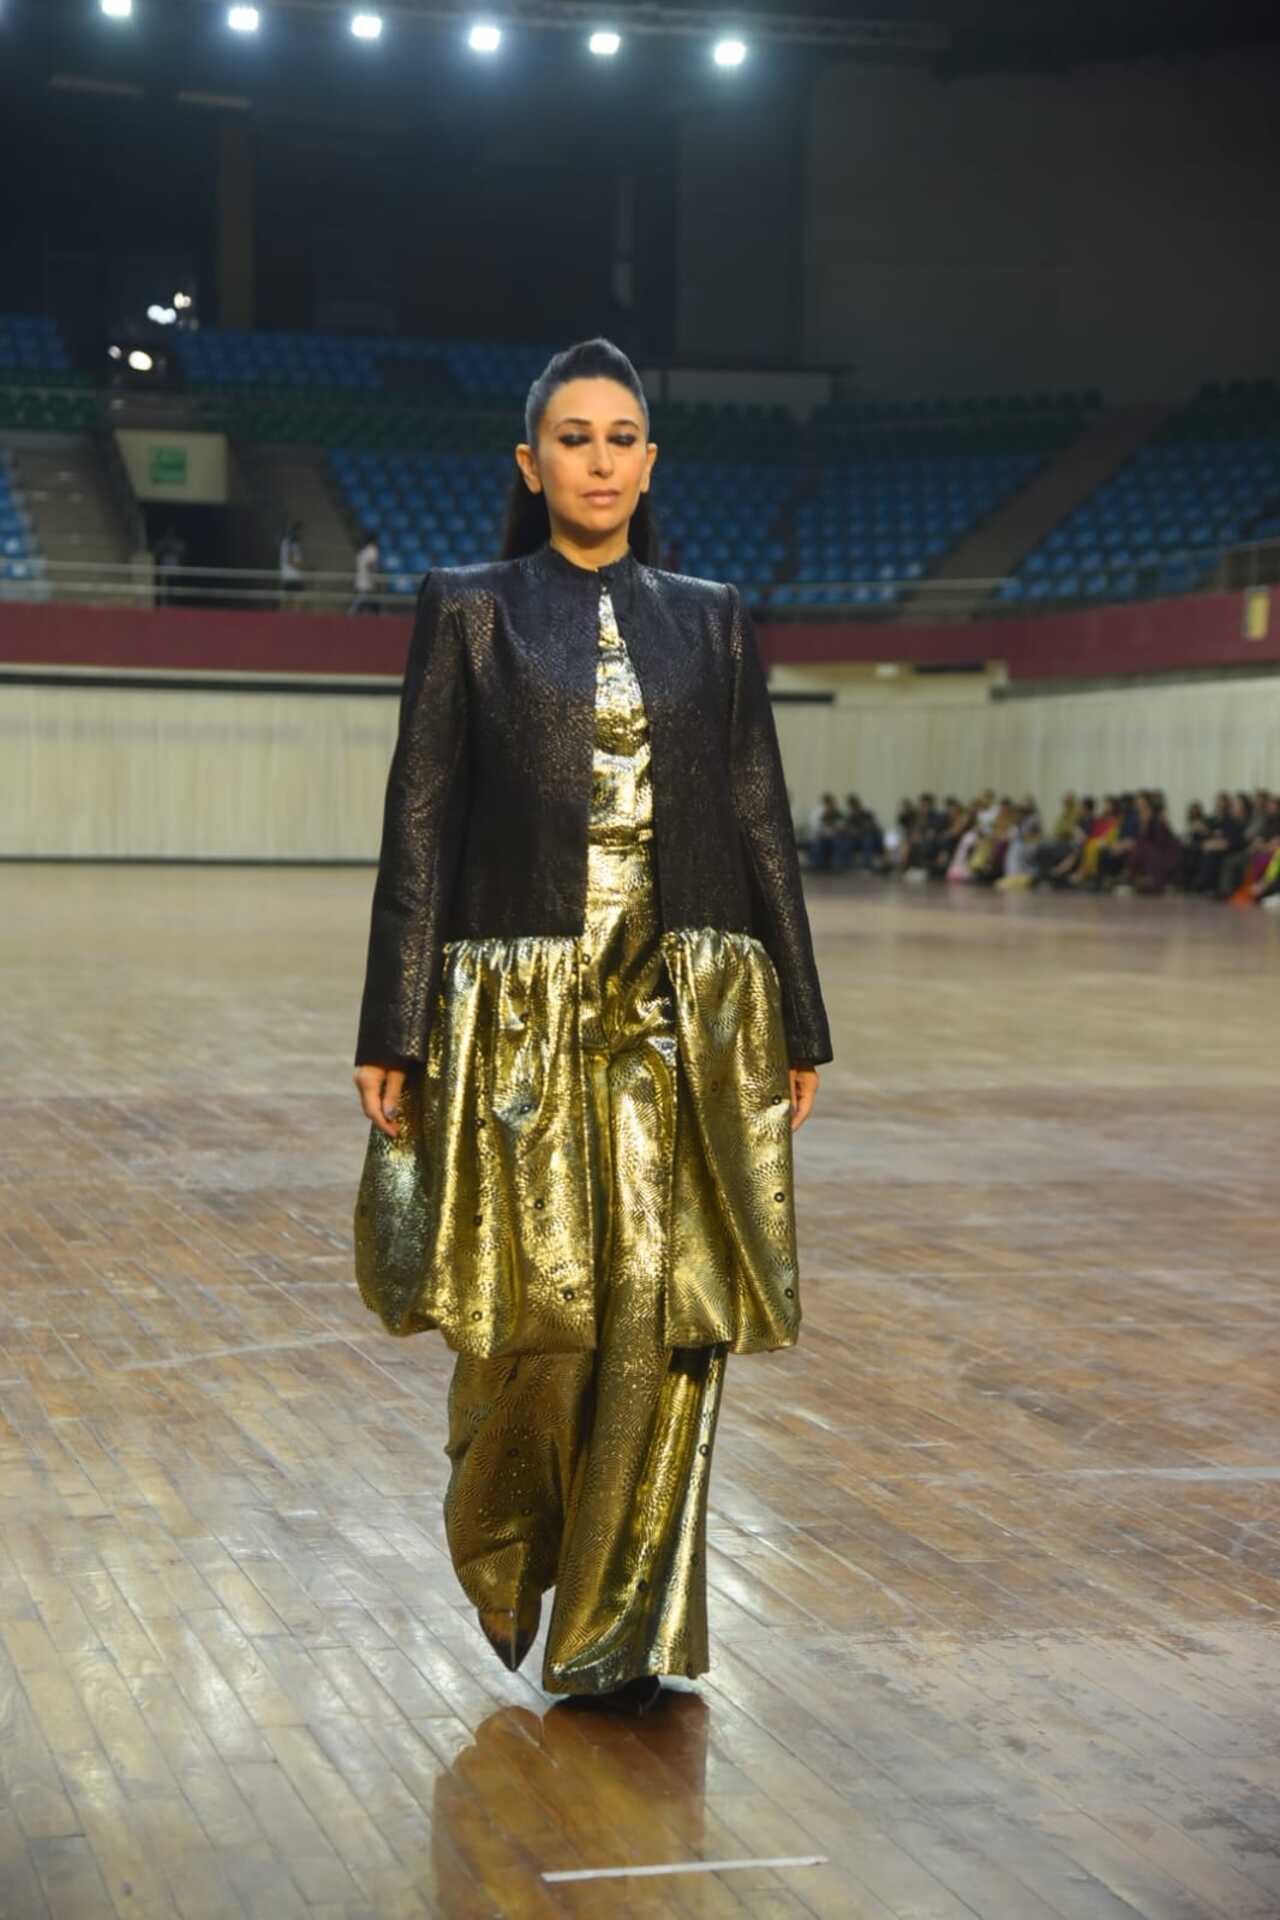 Karisma wore a black and golden dramatic pantsuit. It came with a bandhgala style coat which extended into a front-open flared skirt. She completed her look with golden pants